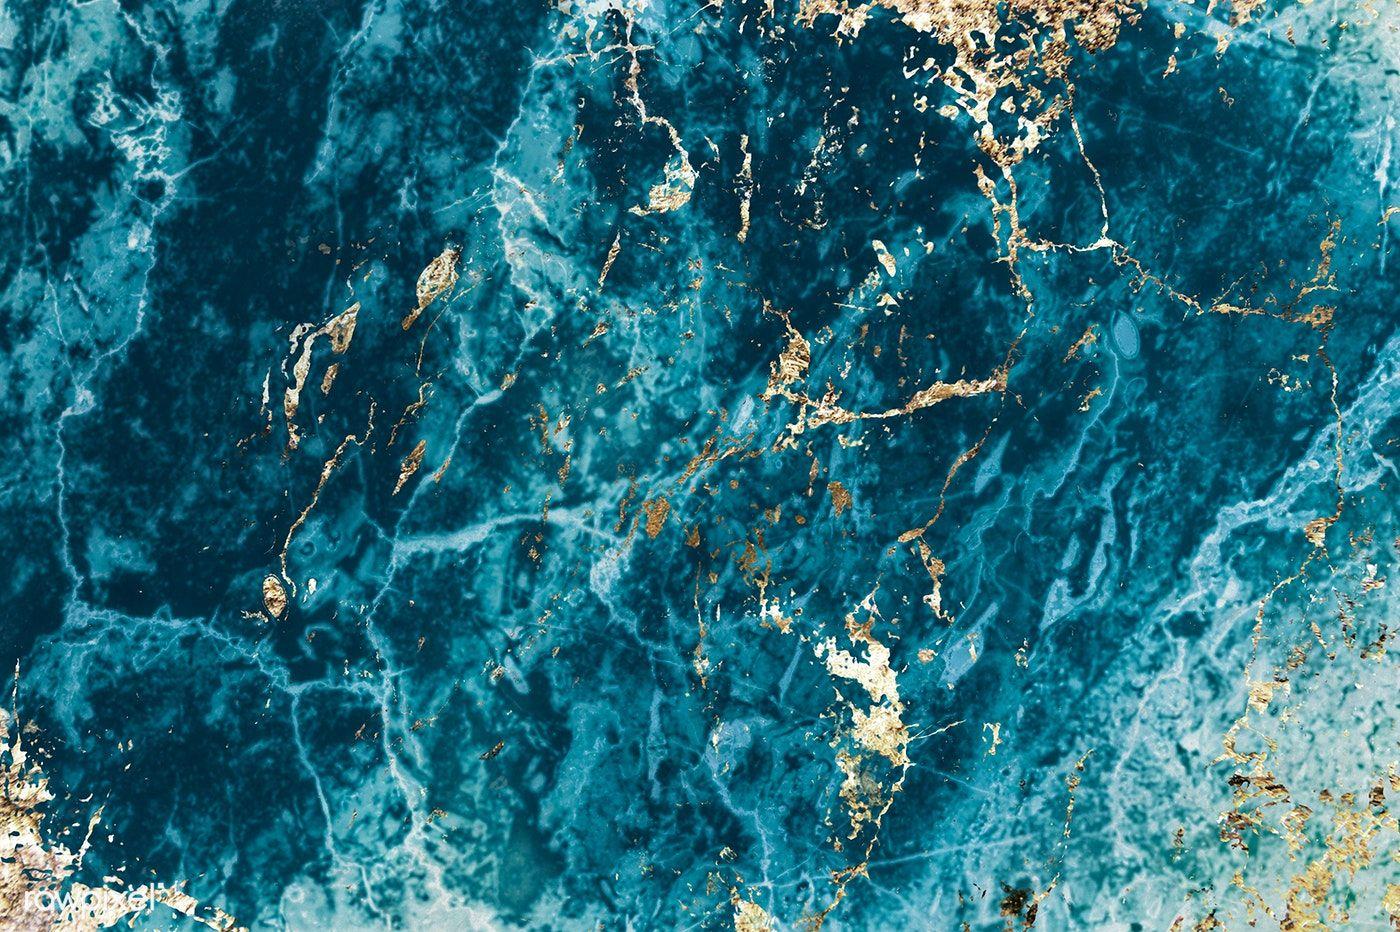 Blue And Gold Marble Textured Background Image By Rawpixel